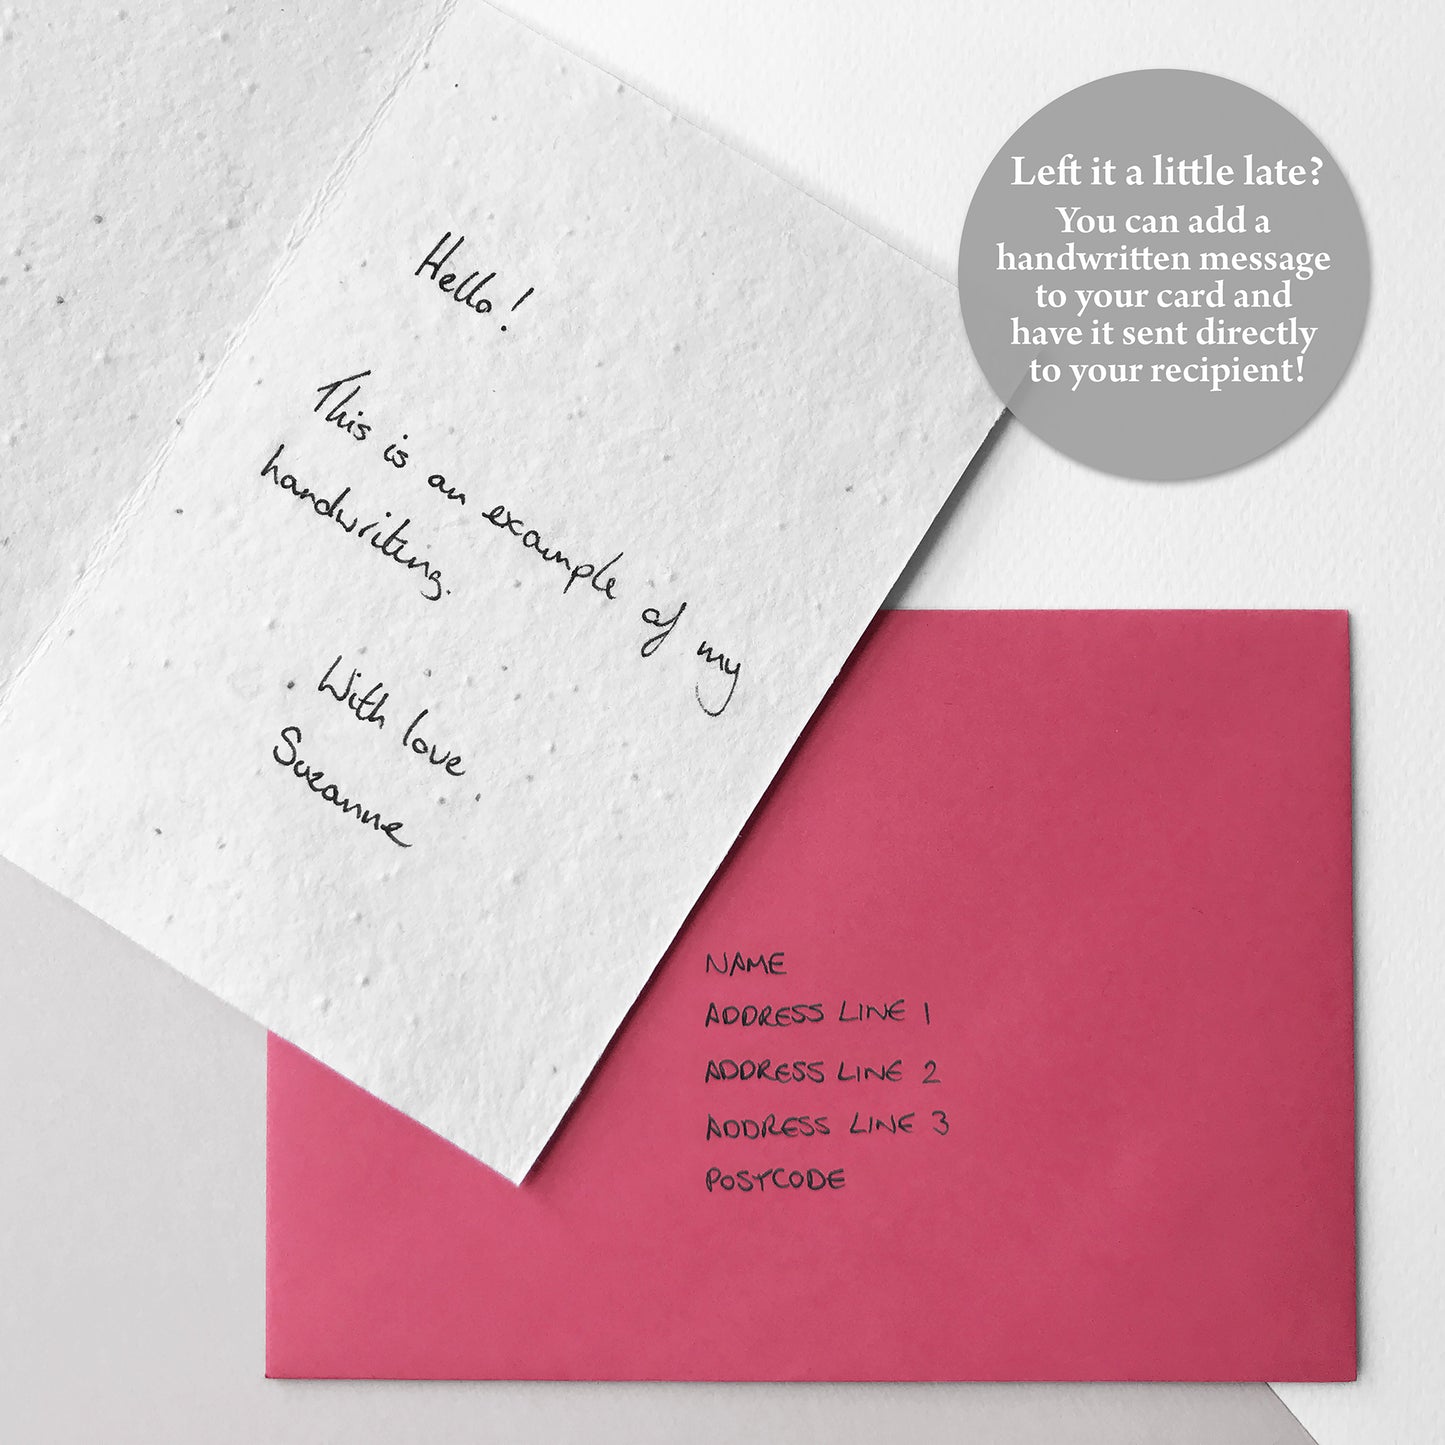 Image shows an example of my handwriting for a personalised handwritten message inside your plantable anniversary card along with a handwritten addressed magenta pink envelope. You can choose to receive your card blank inside or add a handwritten message and send it directly to your recipient at no extra cost.